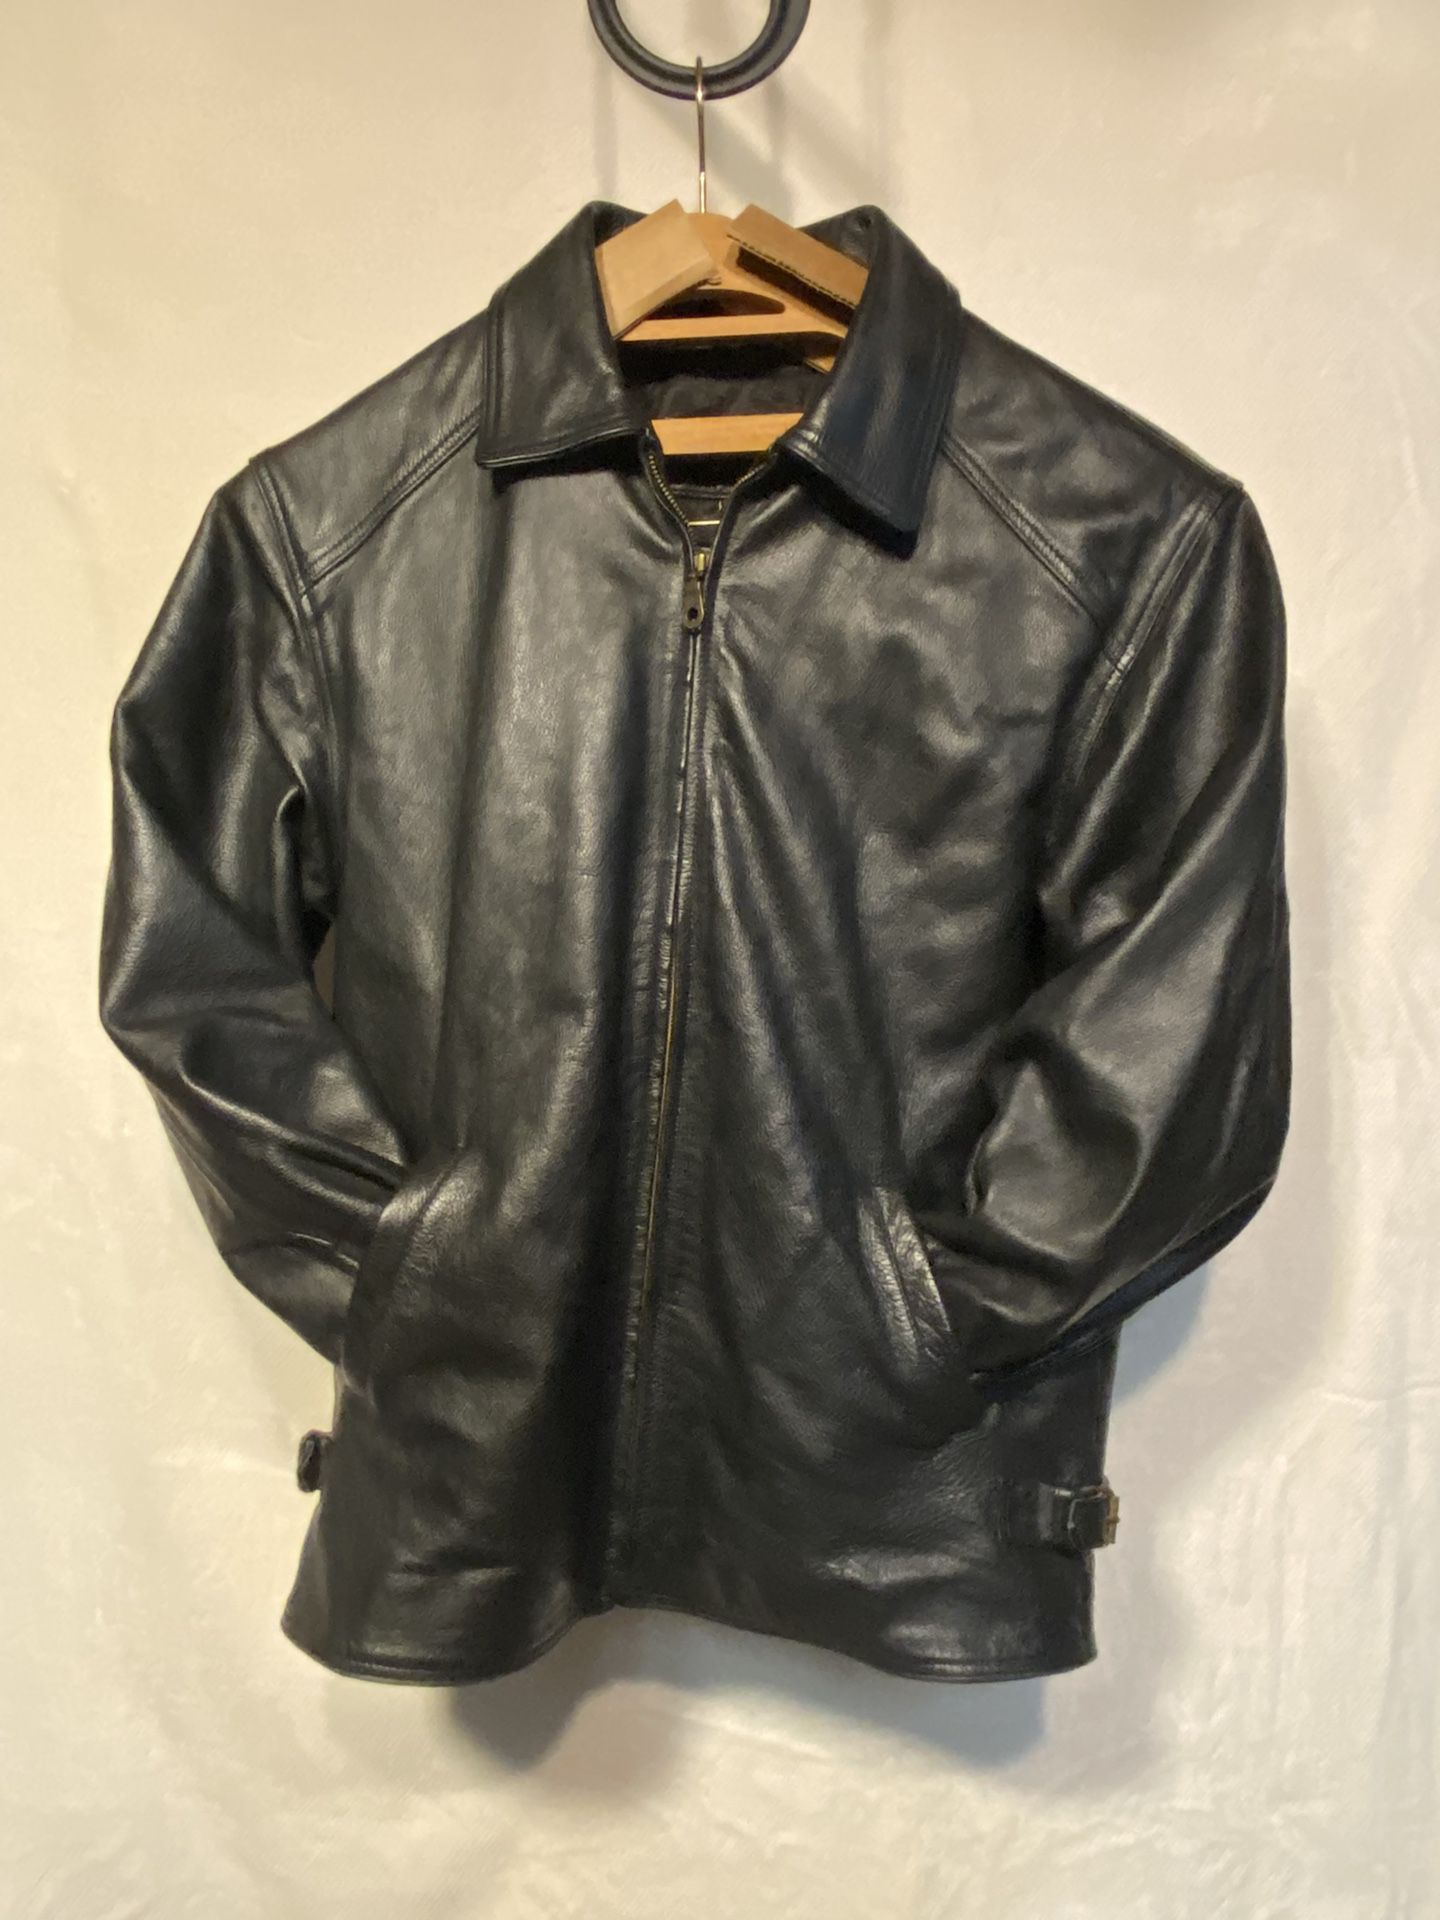 Really Nice Quality Men’s  Leather Jacket!!! Casual Dress Or Motorcycle!!!